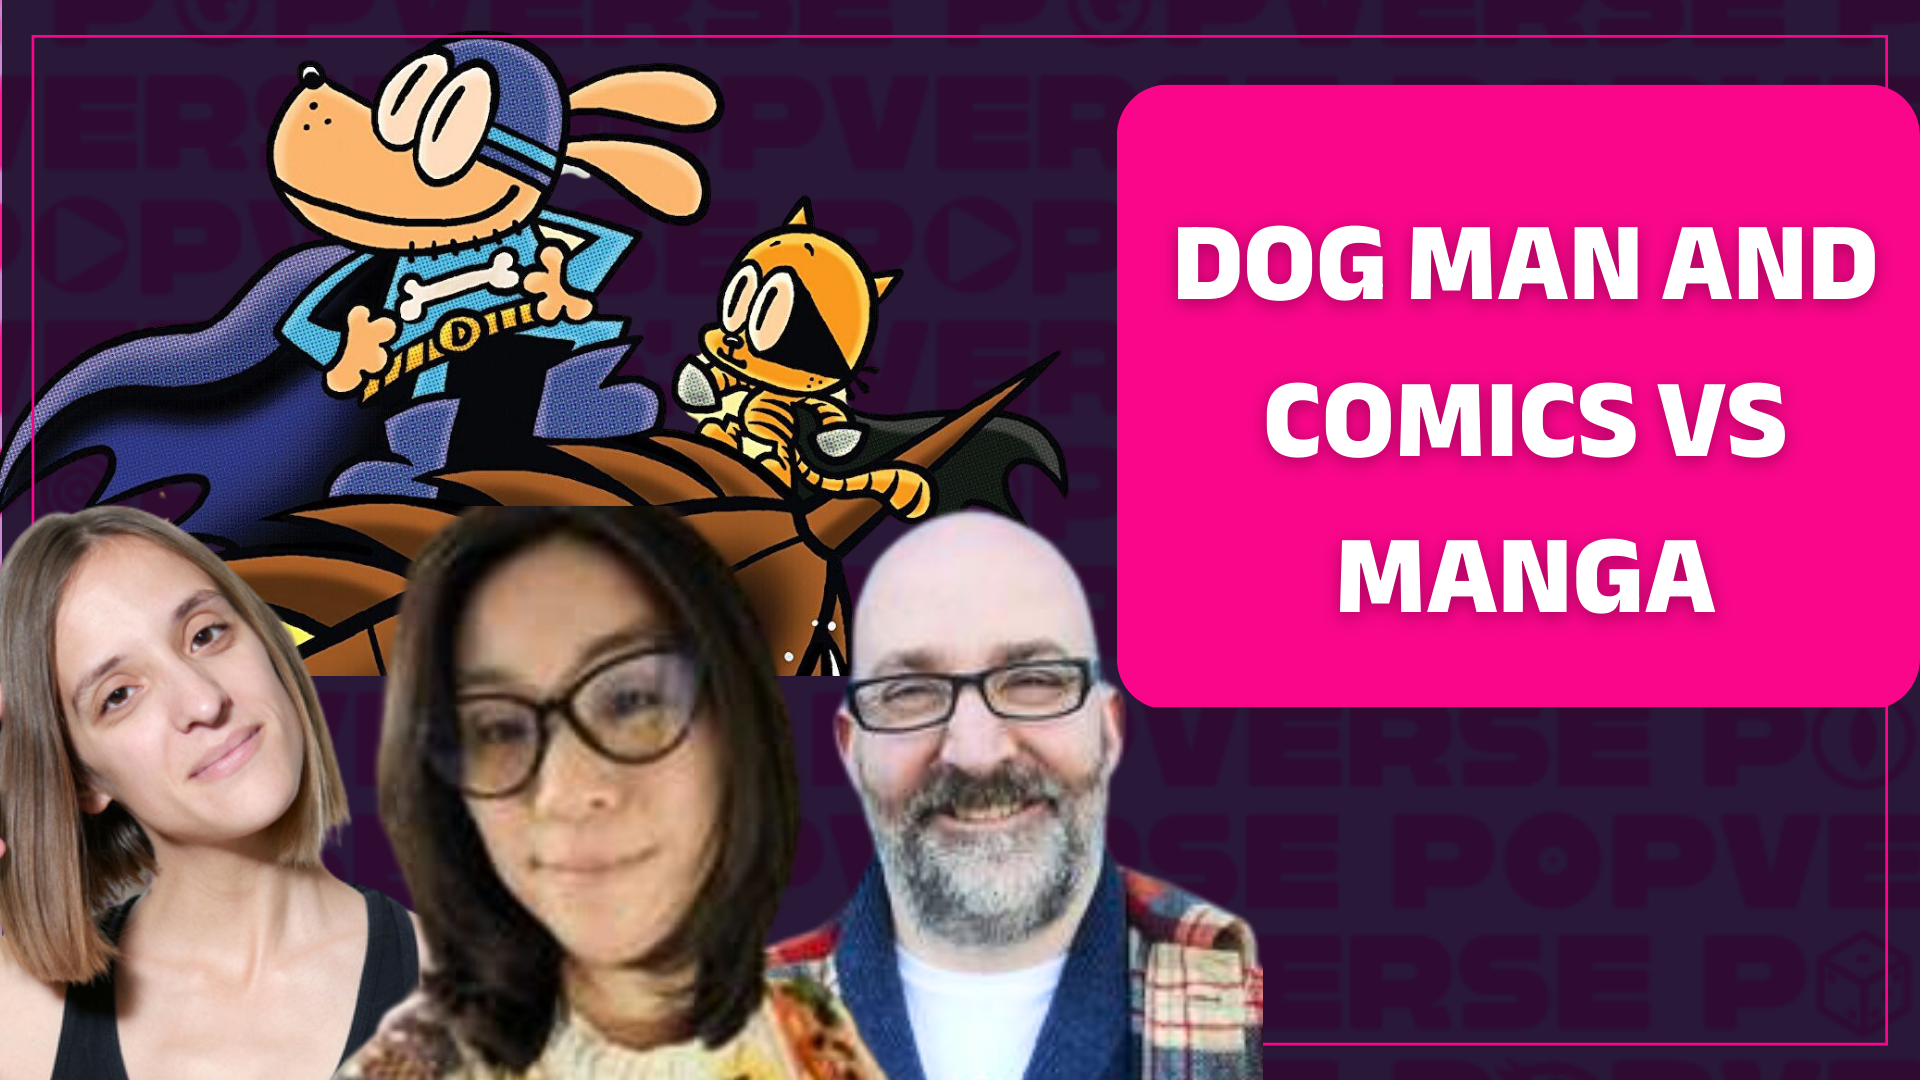 Image for Dav Pilkey's Dog Man swoops in to Enter the Popverse